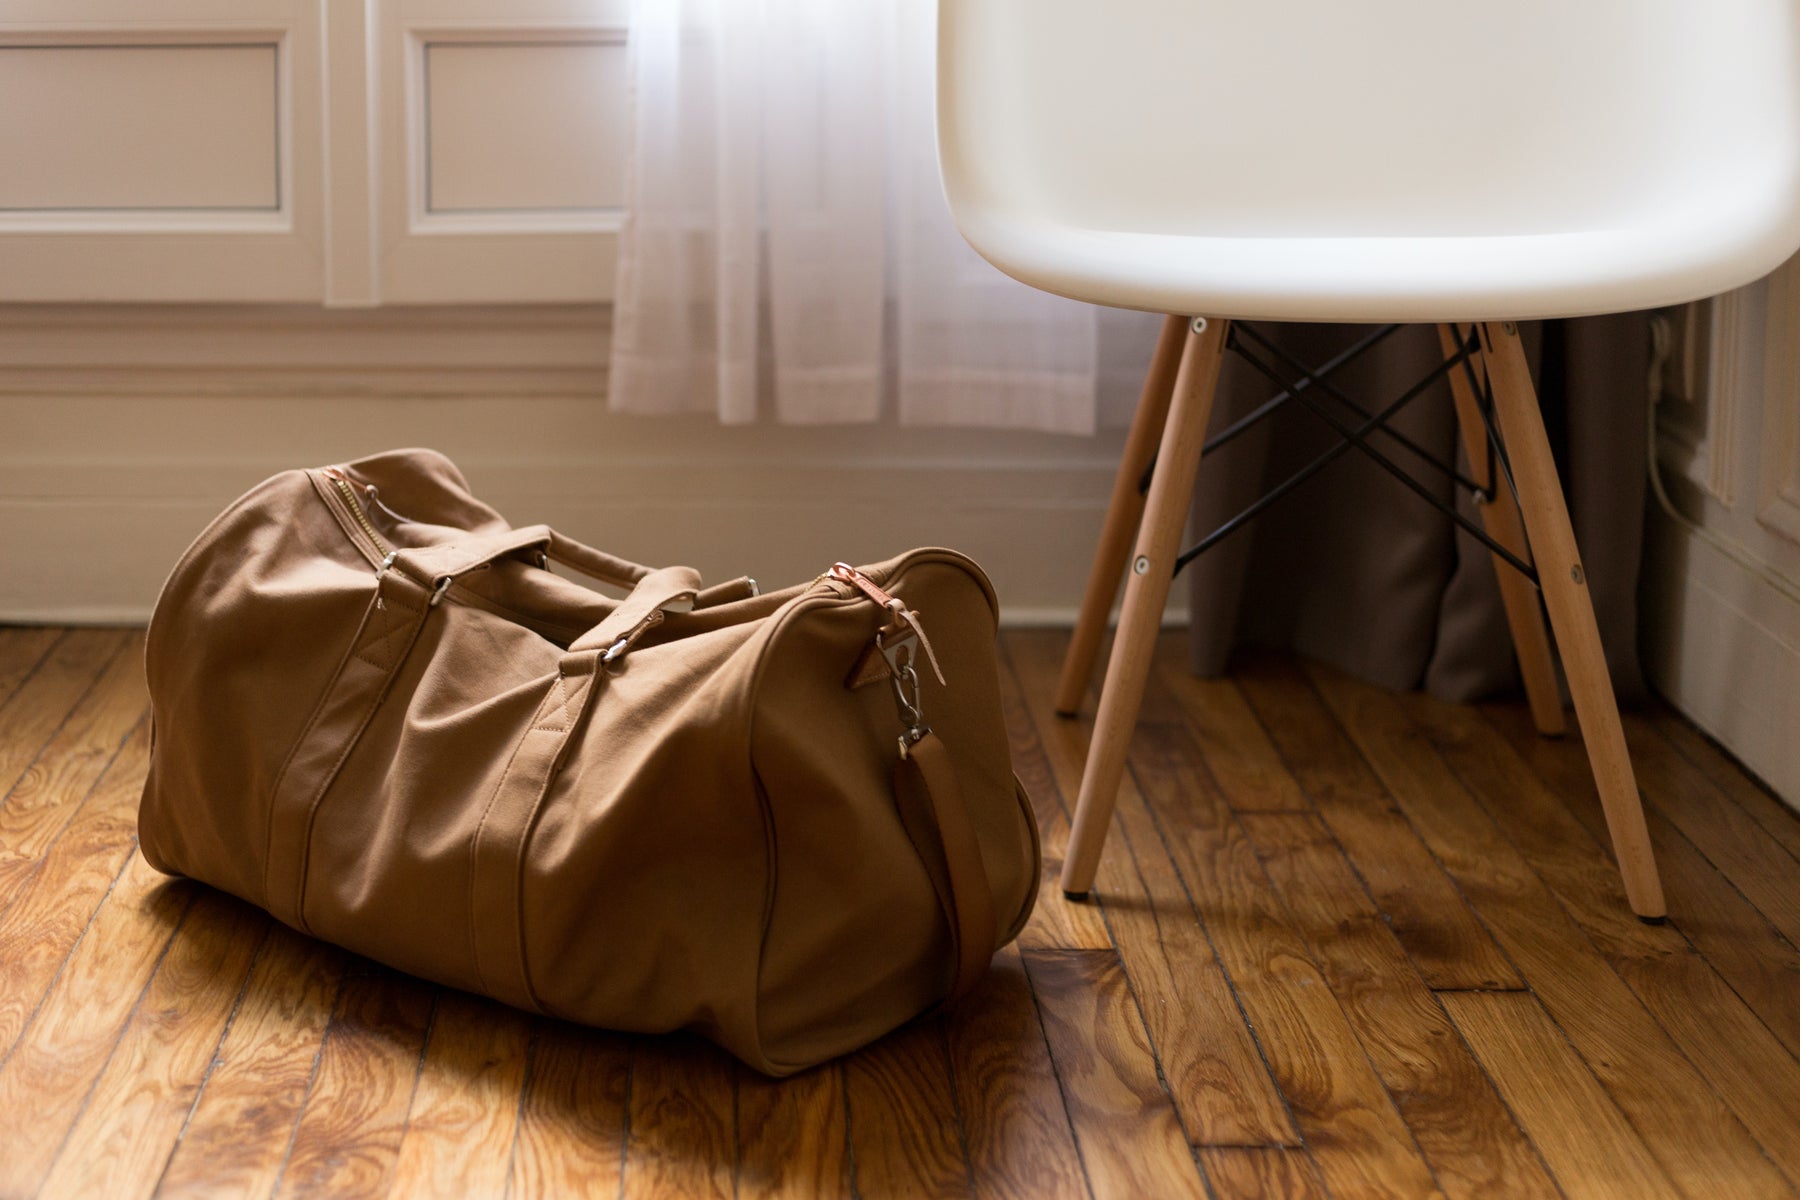 Don’t Stress and Needlessly Shuffle – Travel, Exercise, and Organize It All with a Duffel!